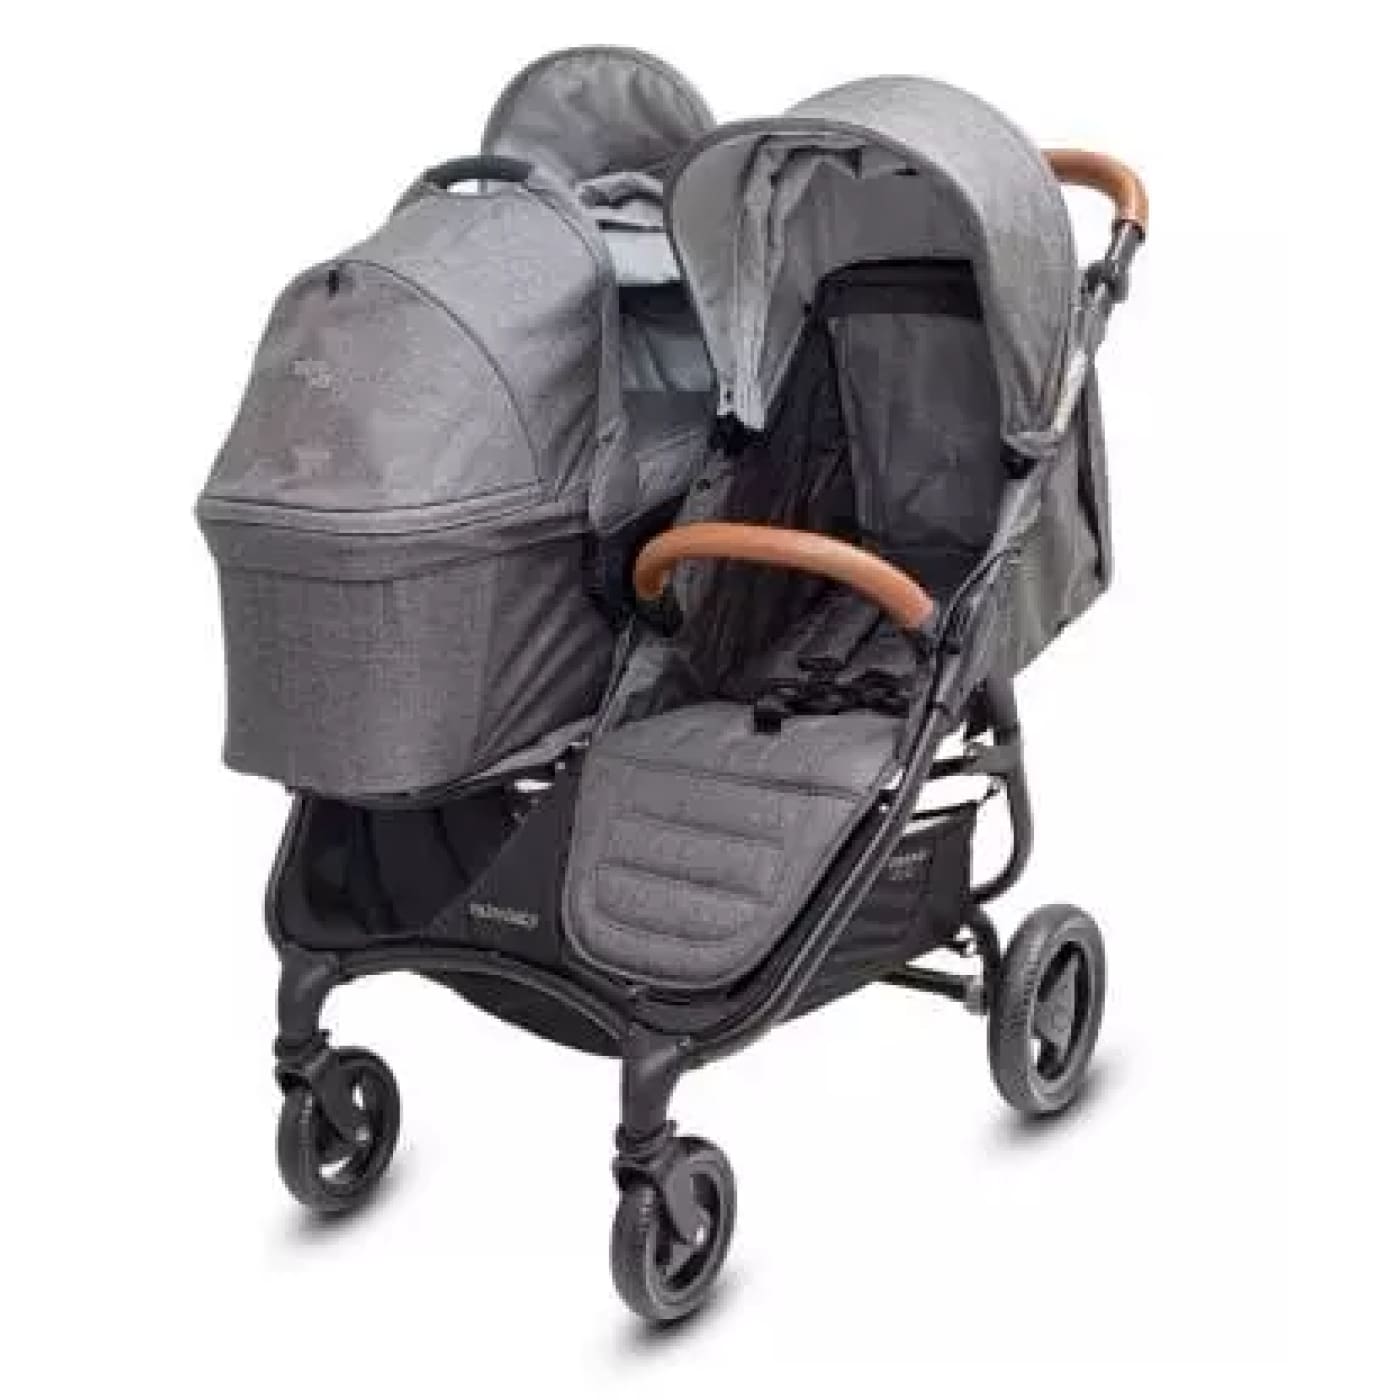 Valco Baby Bassinet for Snap Duo Trend (Includes Adaptor) - Charcoal - Charcoal - PRAMS & STROLLERS - BASS/CARRY COTS/STANDS